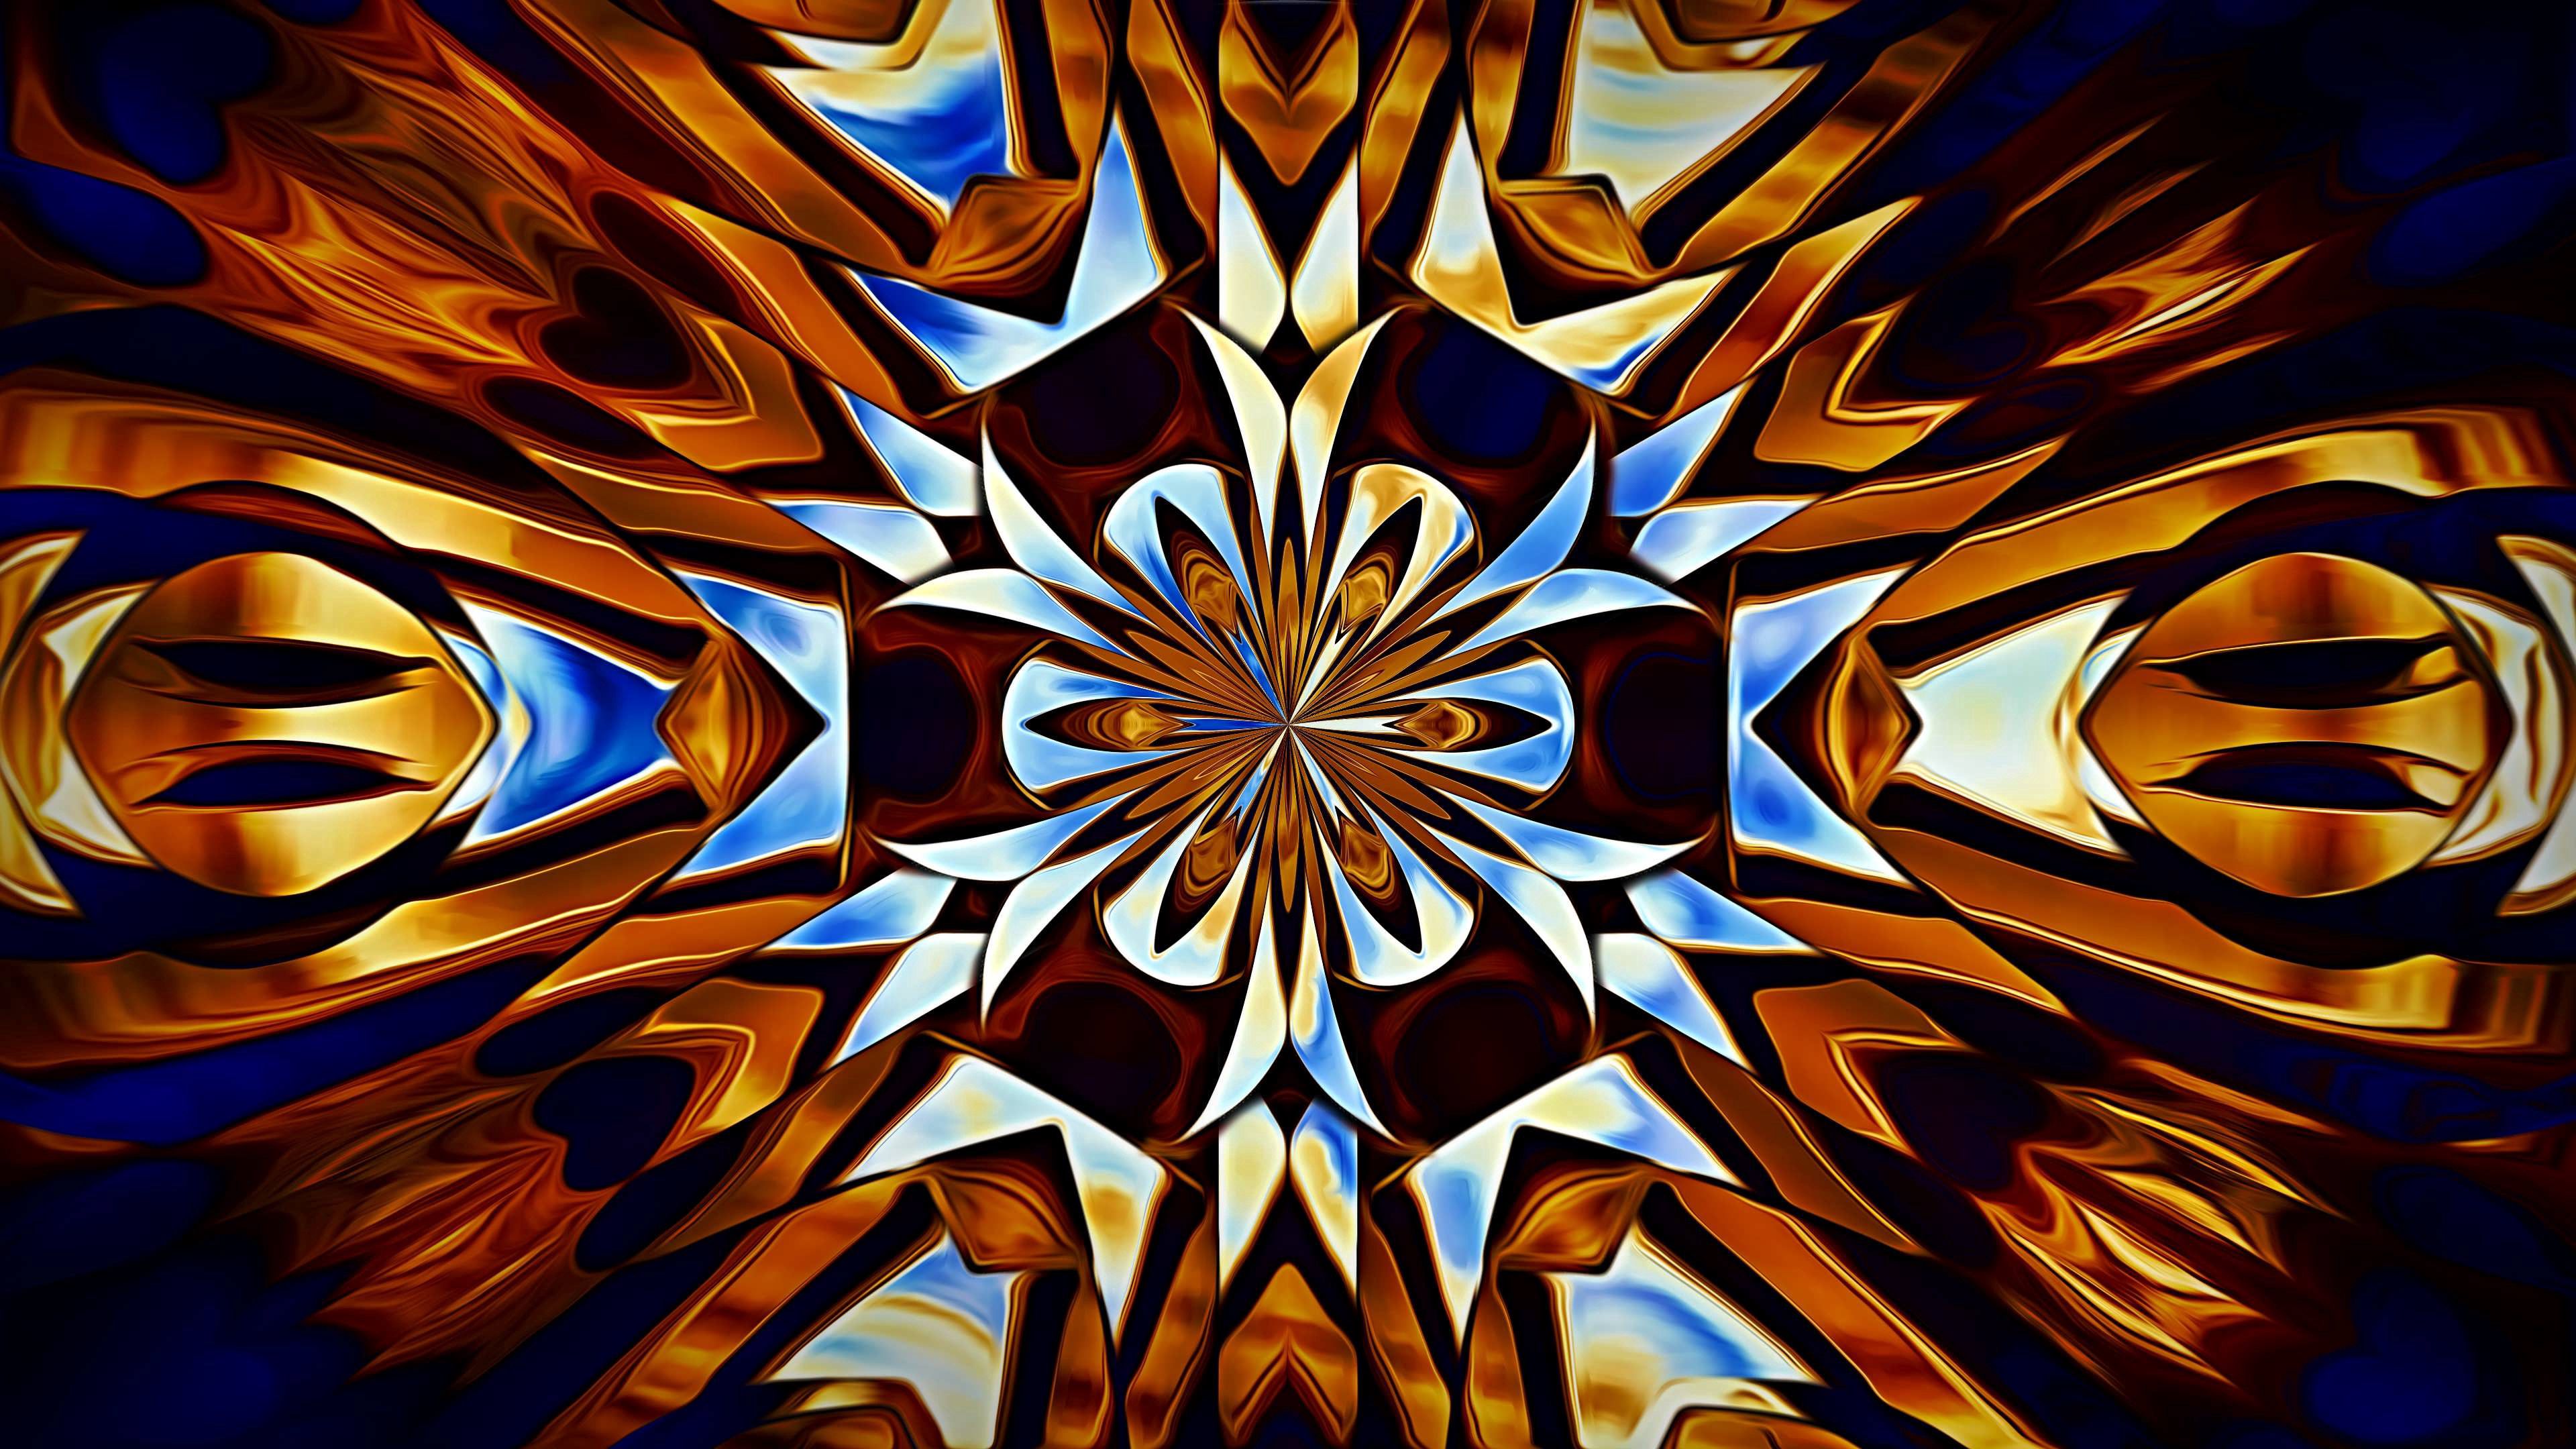 kaleidoscope, symmetry, abstract, pattern, fractal images